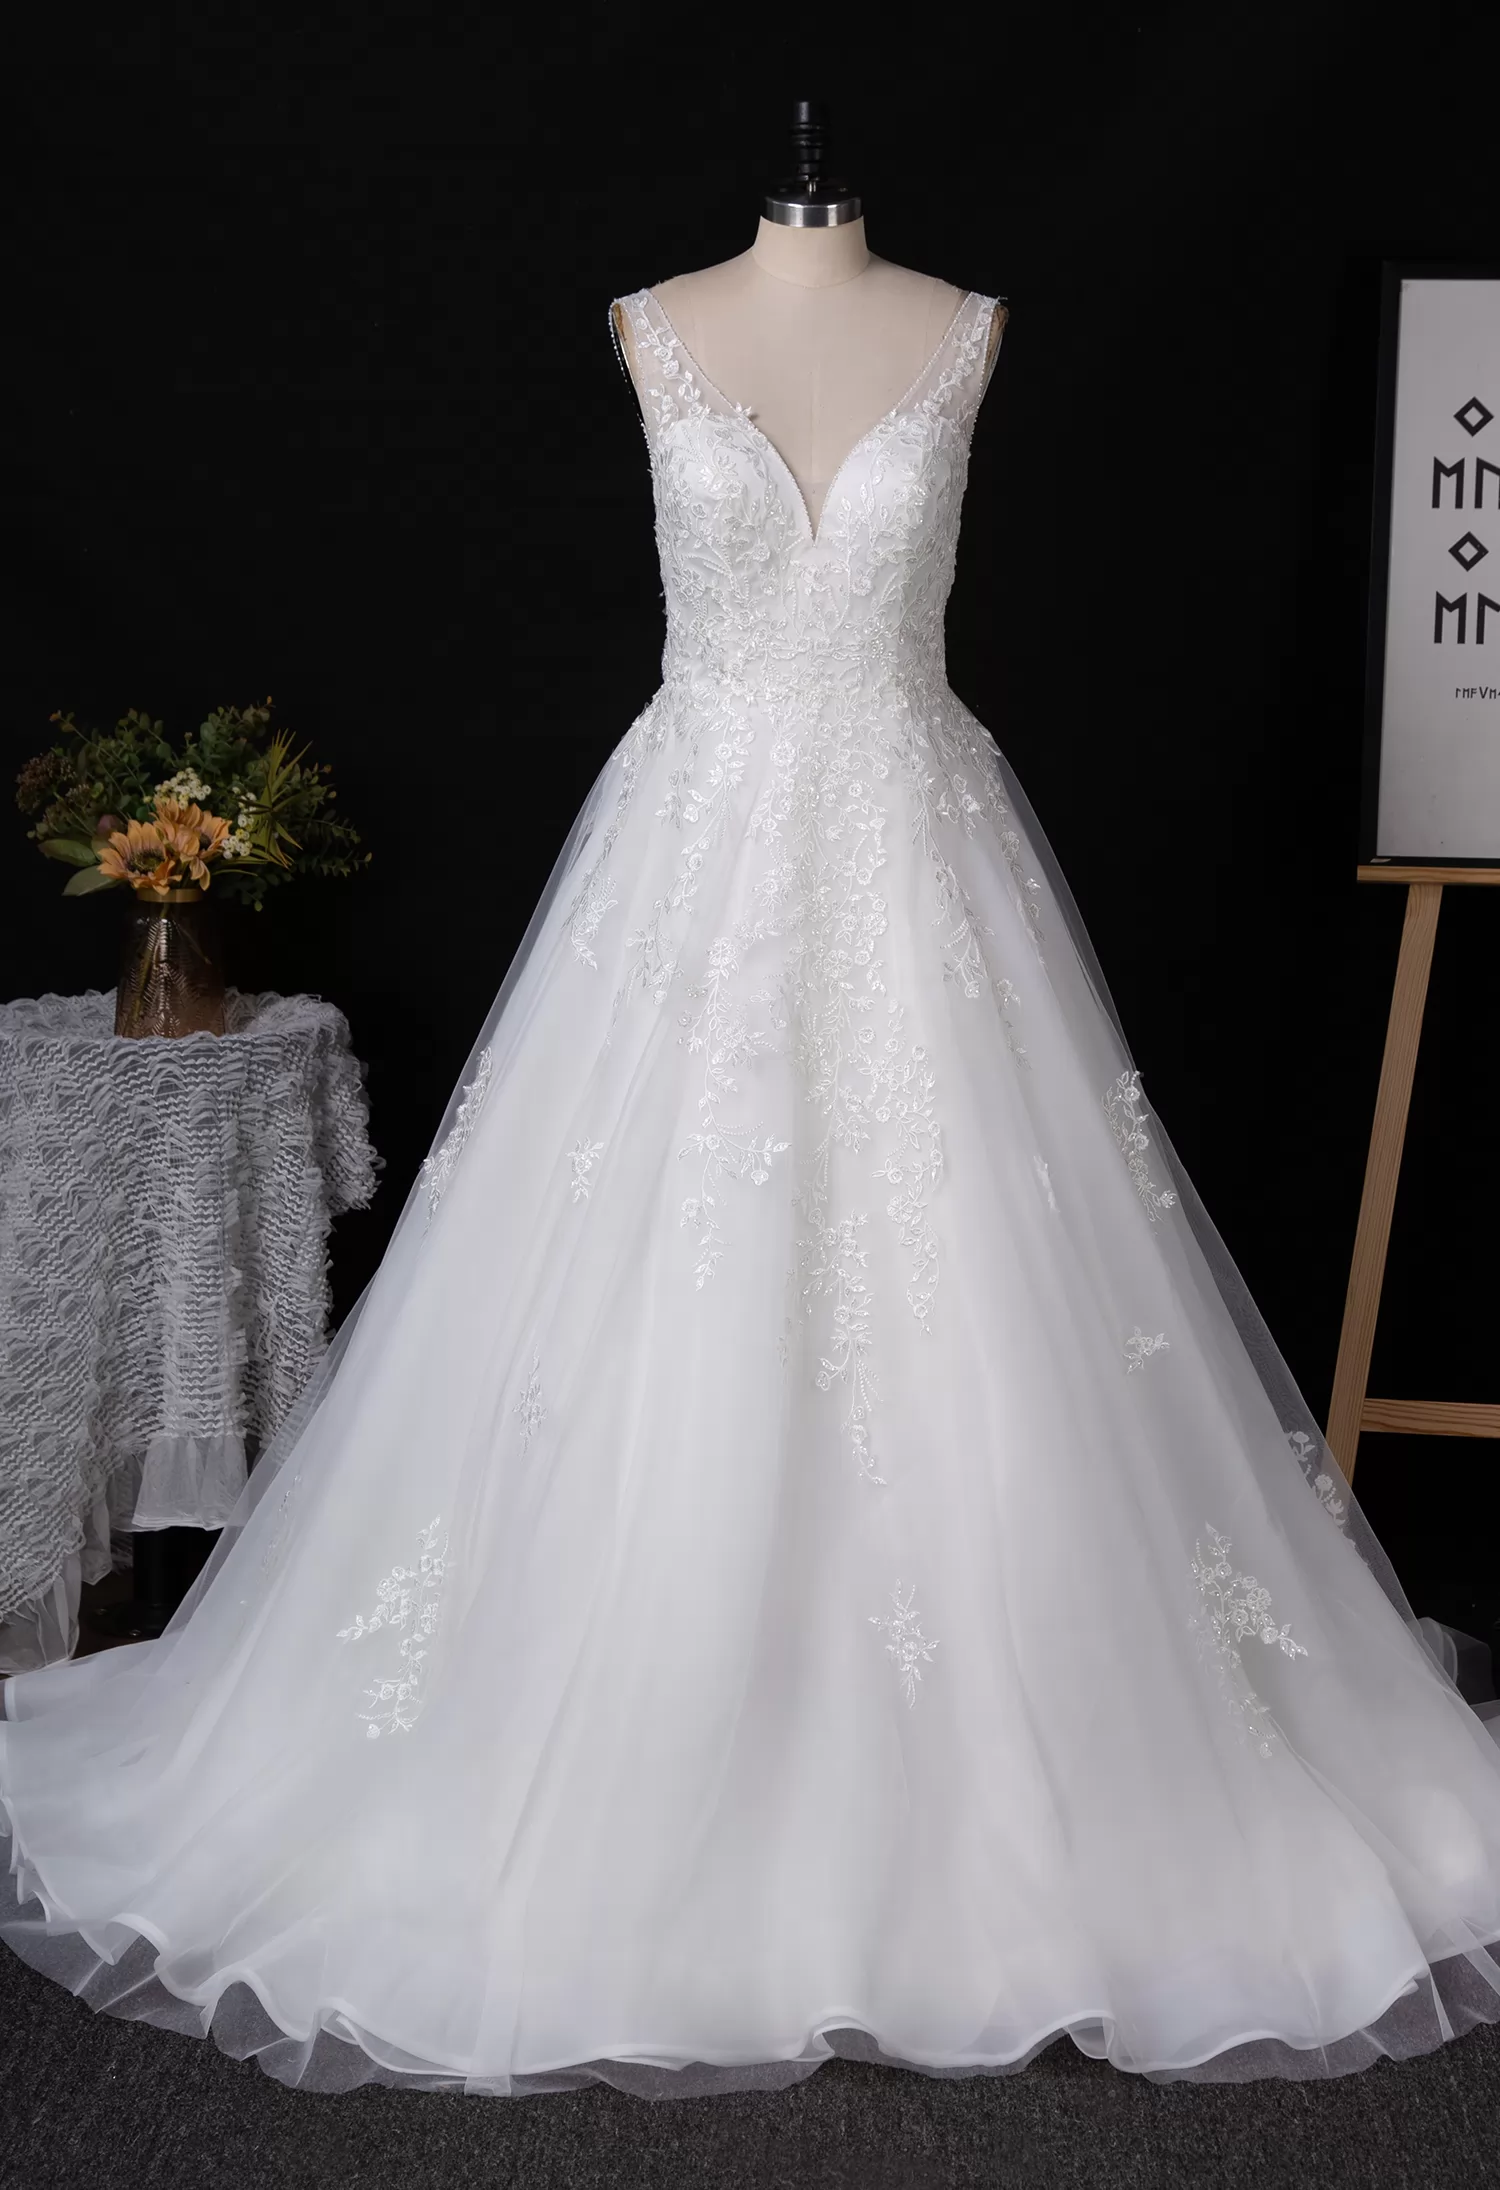 Floral Lace Beaded Wedding Dress With Low Back